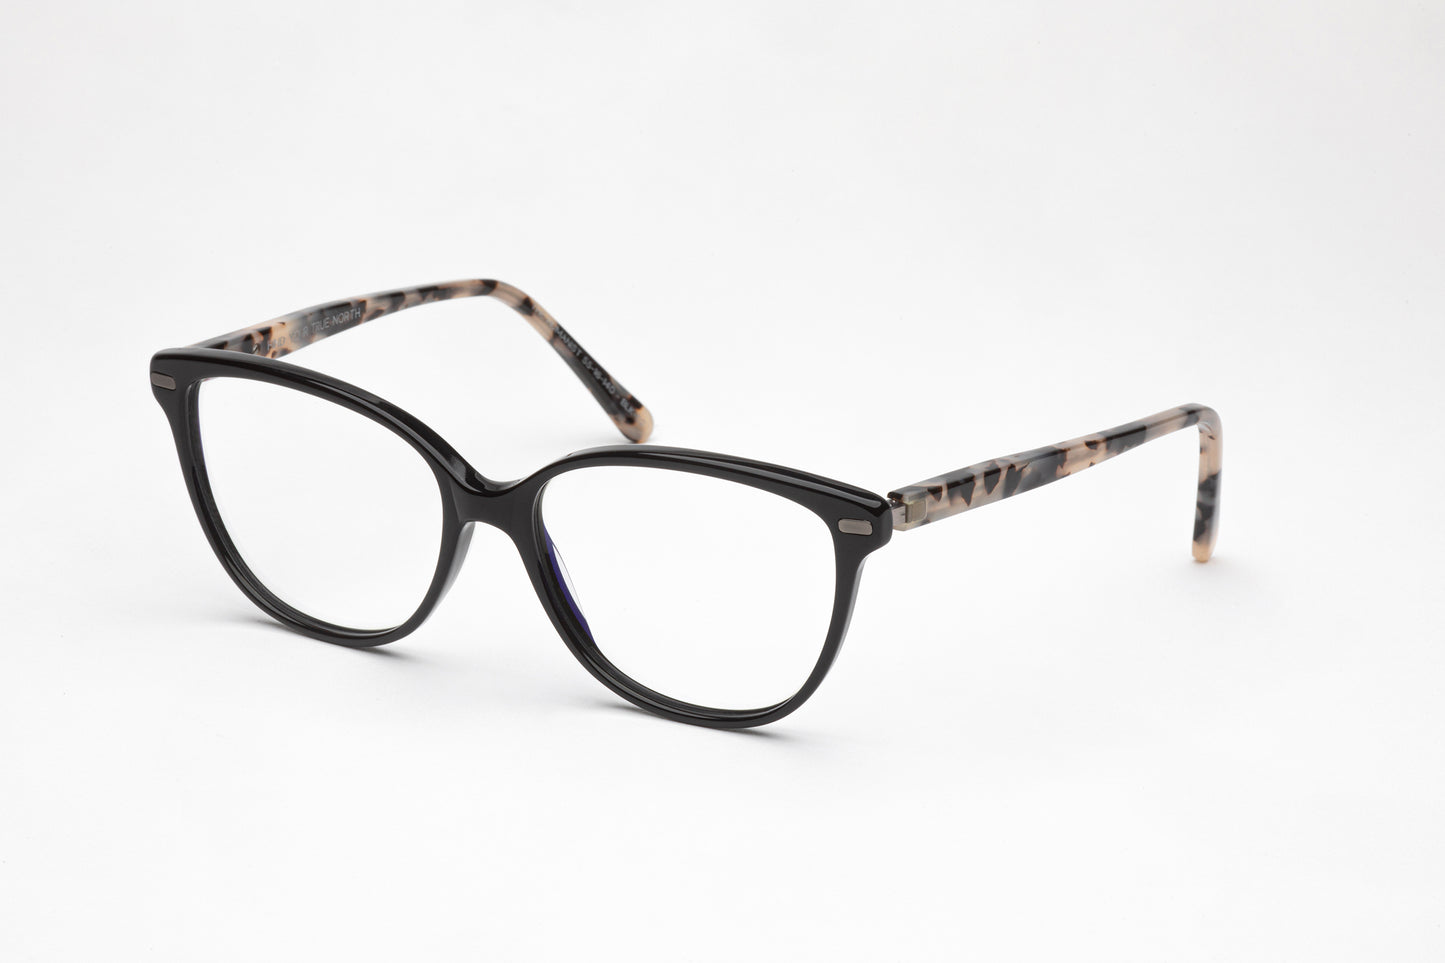 Angled view of The Humanist black acetate glasses frames with tortoiseshell stems